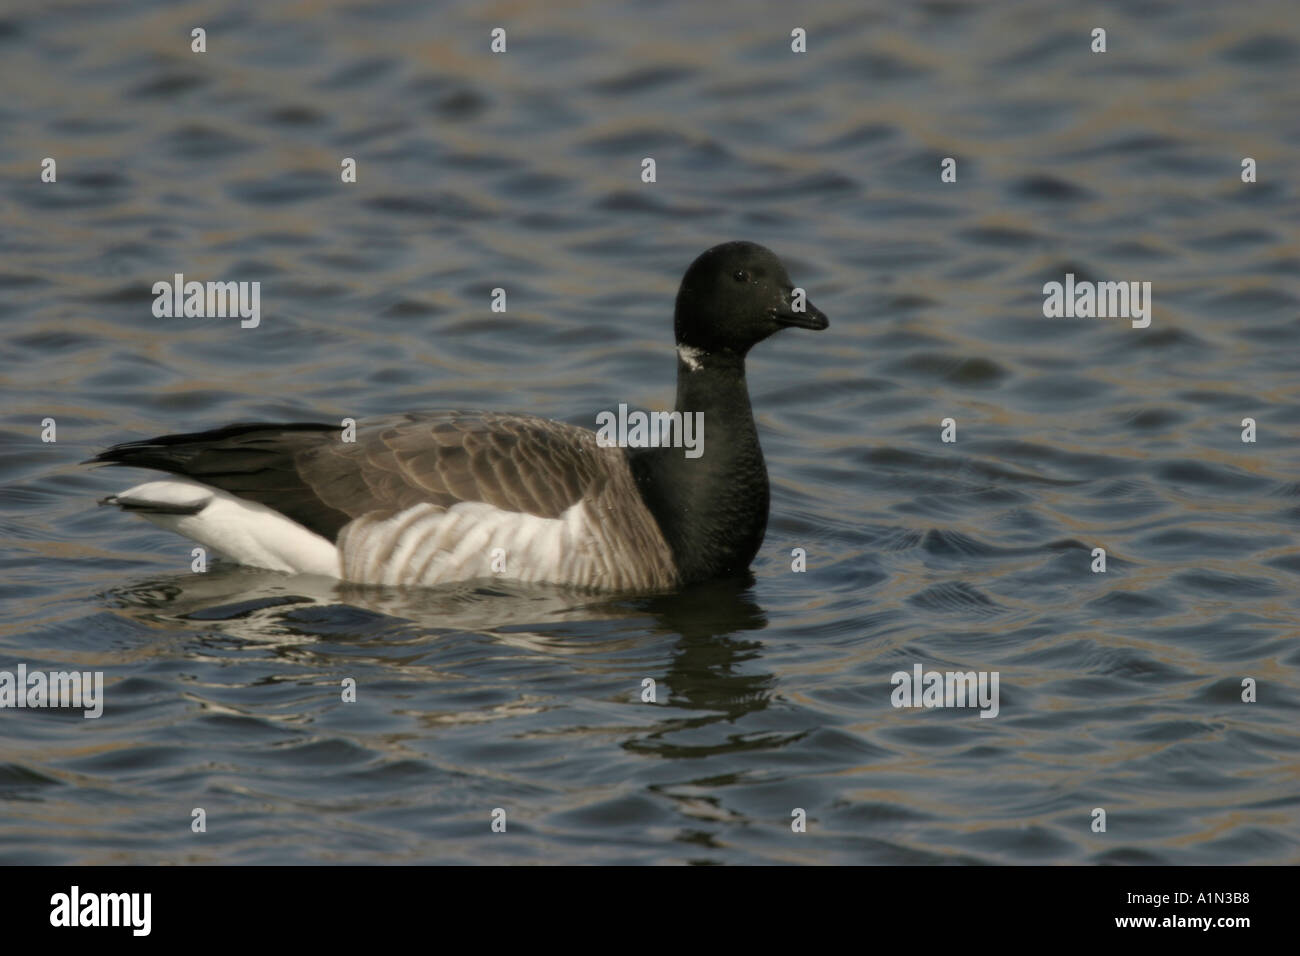 Brant member of the goose family which is almost exclusively coastal is found in flocks on shallow bays and marshes It s flight is usually low and fast with swept back wings Stock Photo